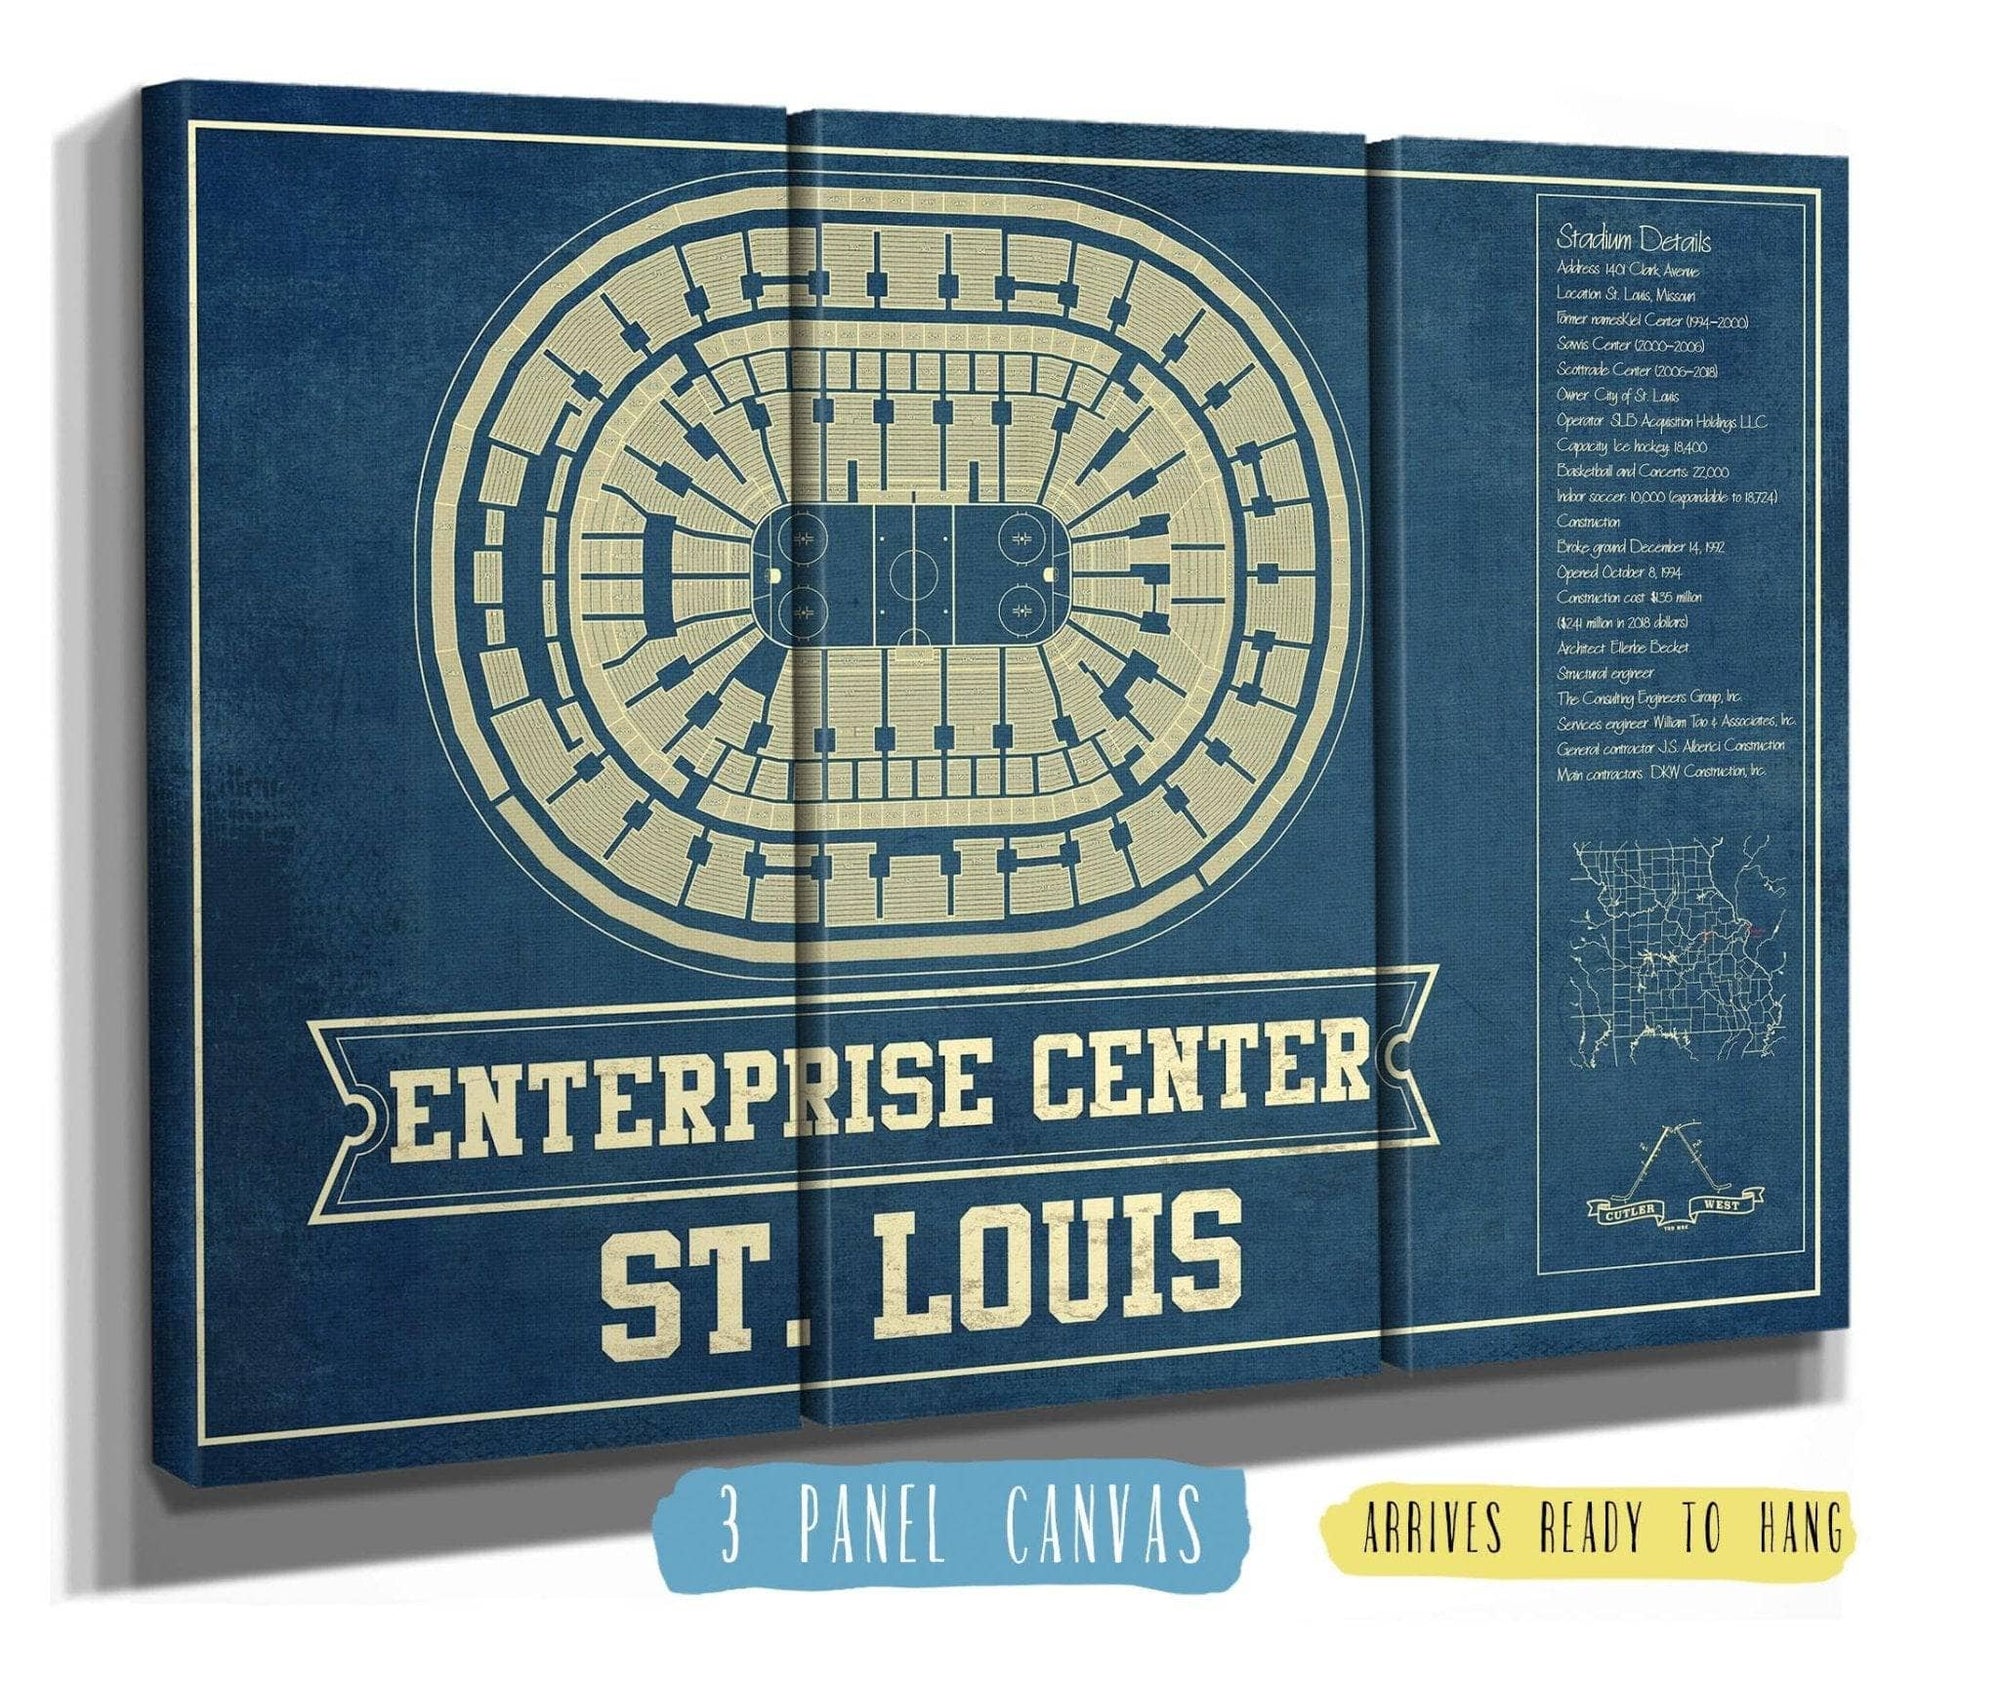 With increased capacity at Enterprise Center, St. Louis Blues to